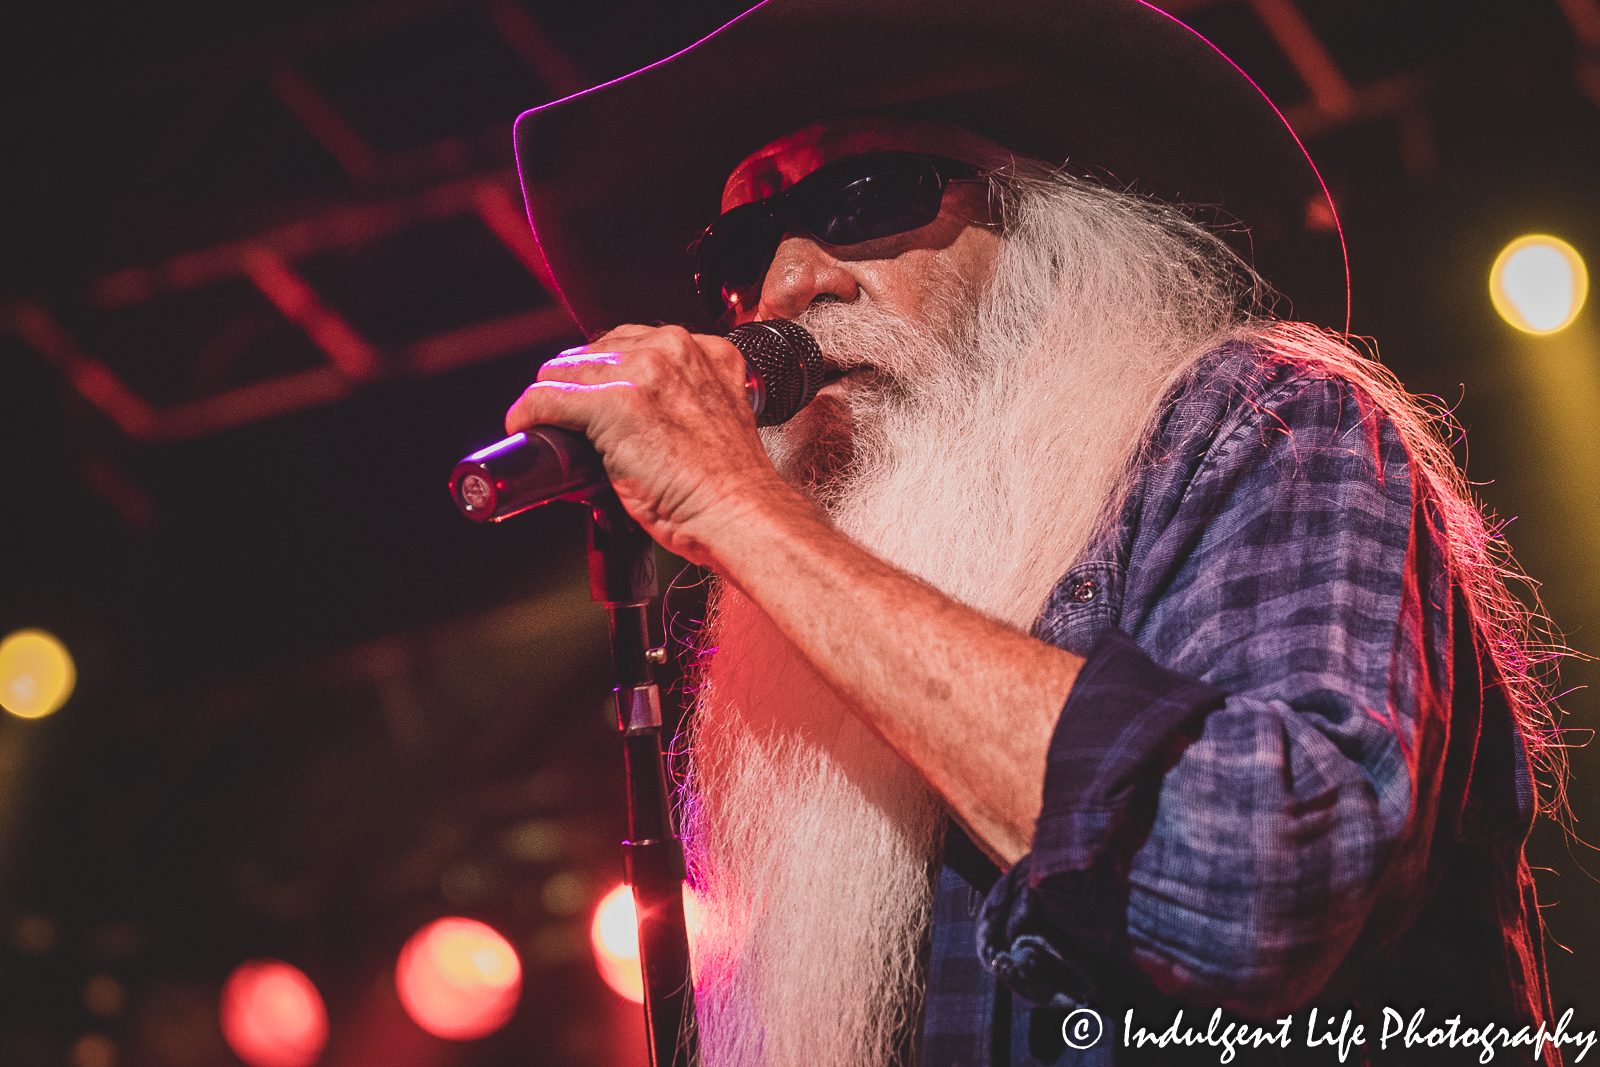 Baritone singer William Lee Golden of country and gospel music group The Oak Ridge Boys performing live at Ameristar Casino's Star Pavilion in Kansas City, MO on September 24, 2021.